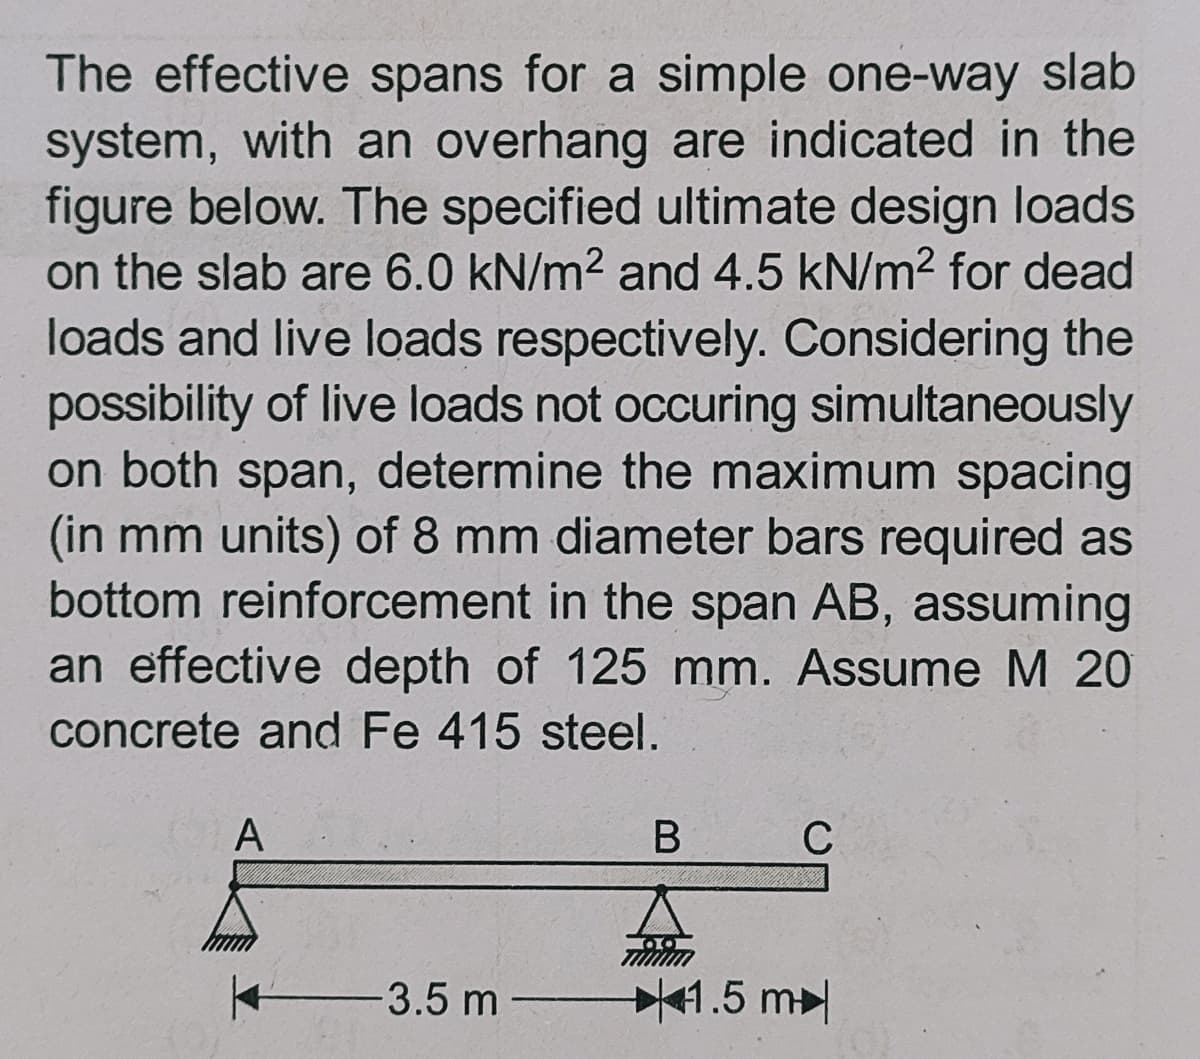 The effective spans for a simple one-way slab
system, with an overhang are indicated in the
figure below. The specified ultimate design loads
on the slab are 6.0 kN/m2 and 4.5 kN/m2 for dead
loads and live loads respectively. Considering the
possibility of live loads not occuring simultaneously
on both span, determine the maximum spacing
(in mm units) of 8 mm diameter bars required as
bottom reinforcement in the span AB, assuming
an effective depth of 125 mm. Assume M 20
concrete and Fe 415 steel.
A
В
C
3.5 m -
41.5 m
